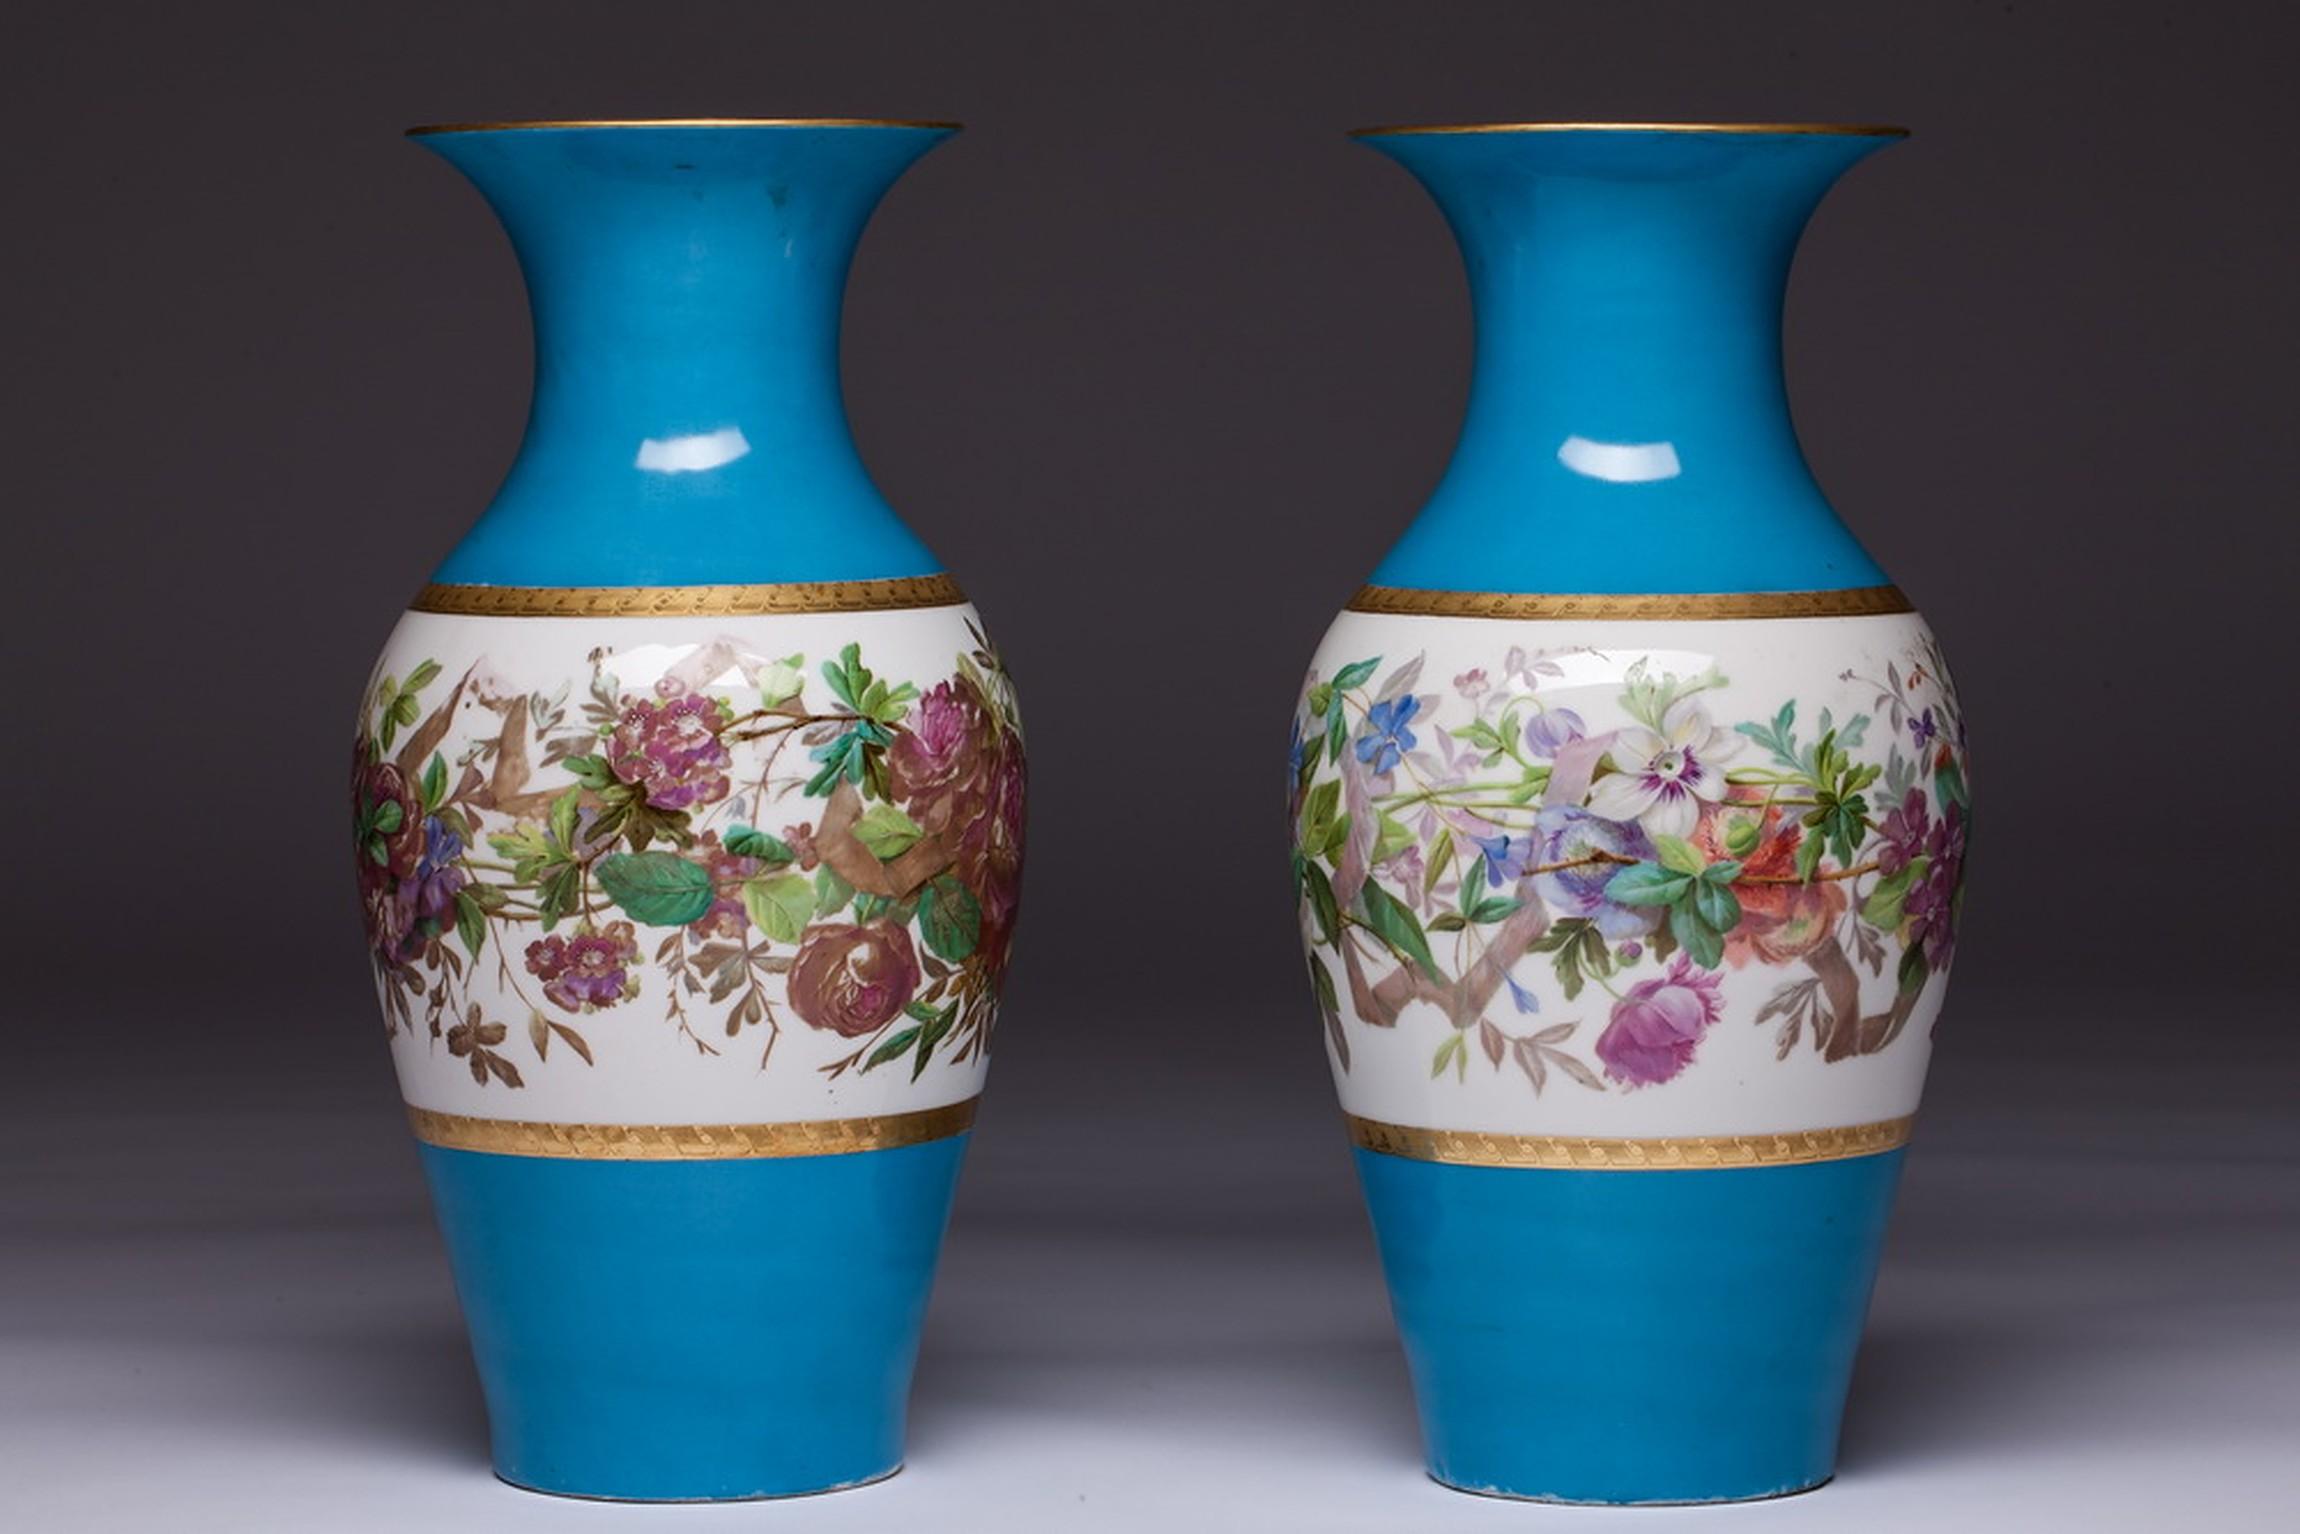 Each of the baluster form vases has a cylindrical neck and everted rim and are painted with floral bouquets on a white ground. On the reverse, each has a large single flower specimen.